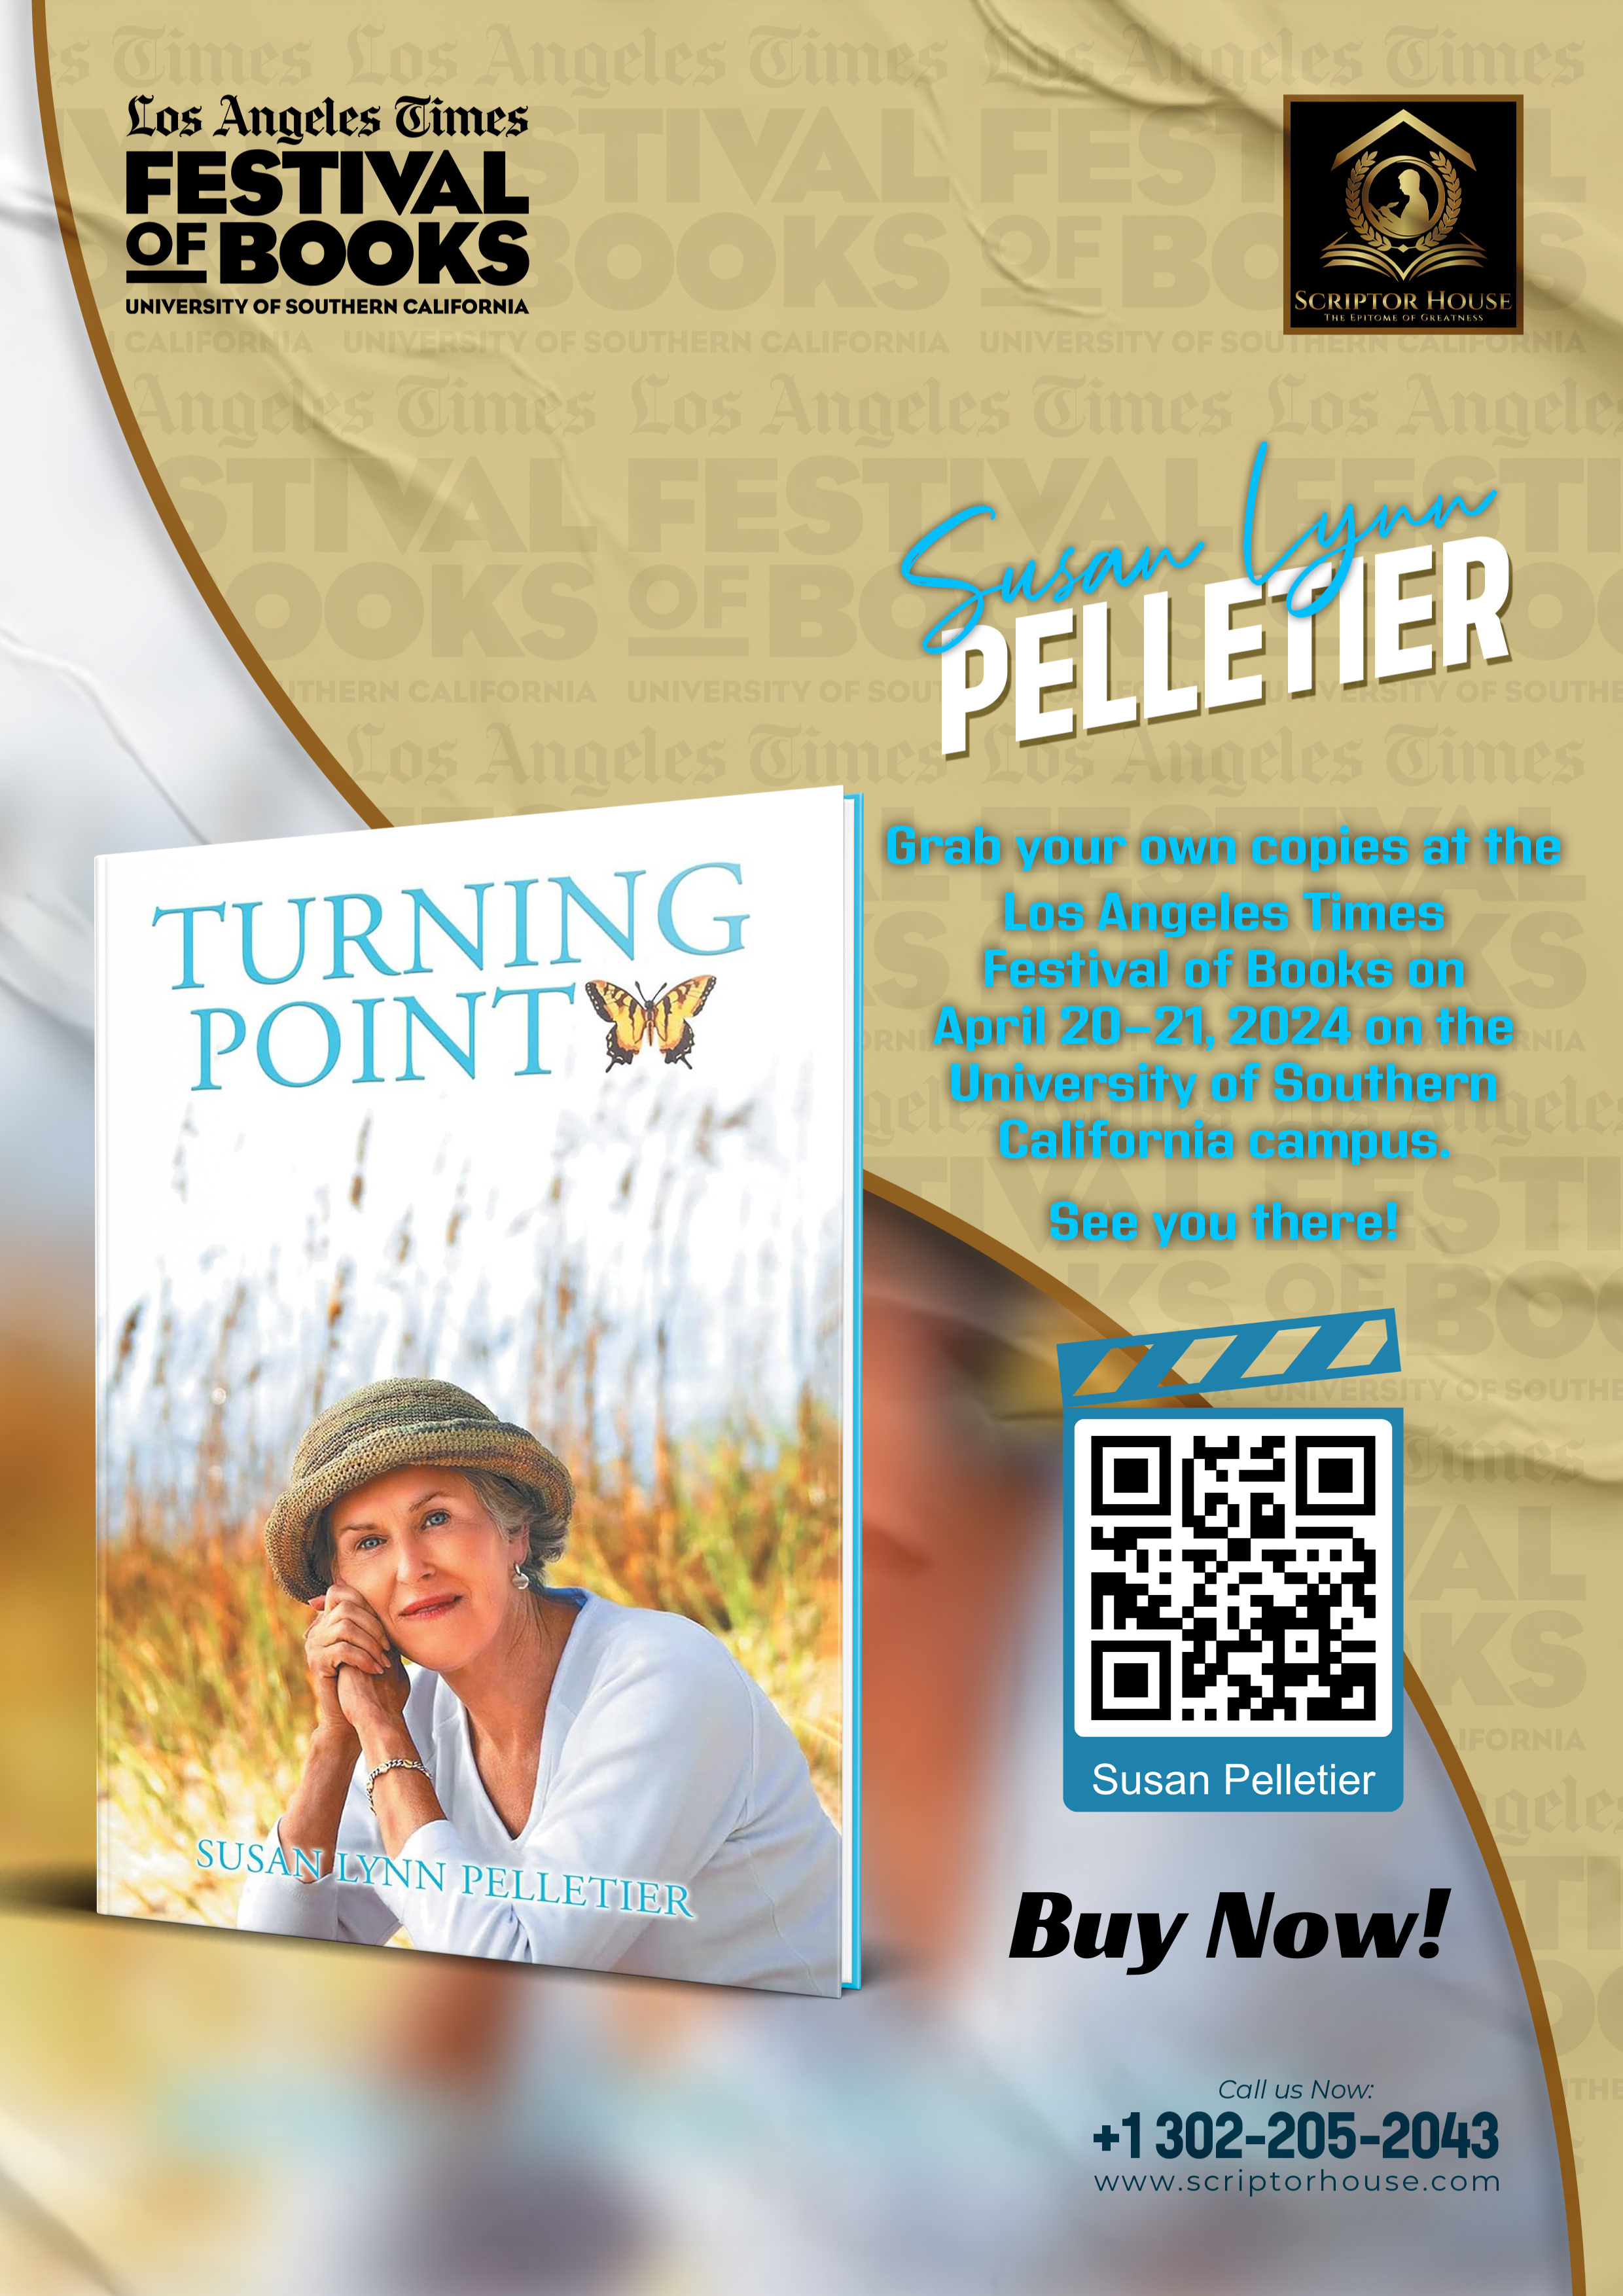 A Timeless Journey Through History: Susan L. Pelletier’s Debut Novel "Turning Point" Premieres at the L.A. Times Festival of Books 2024